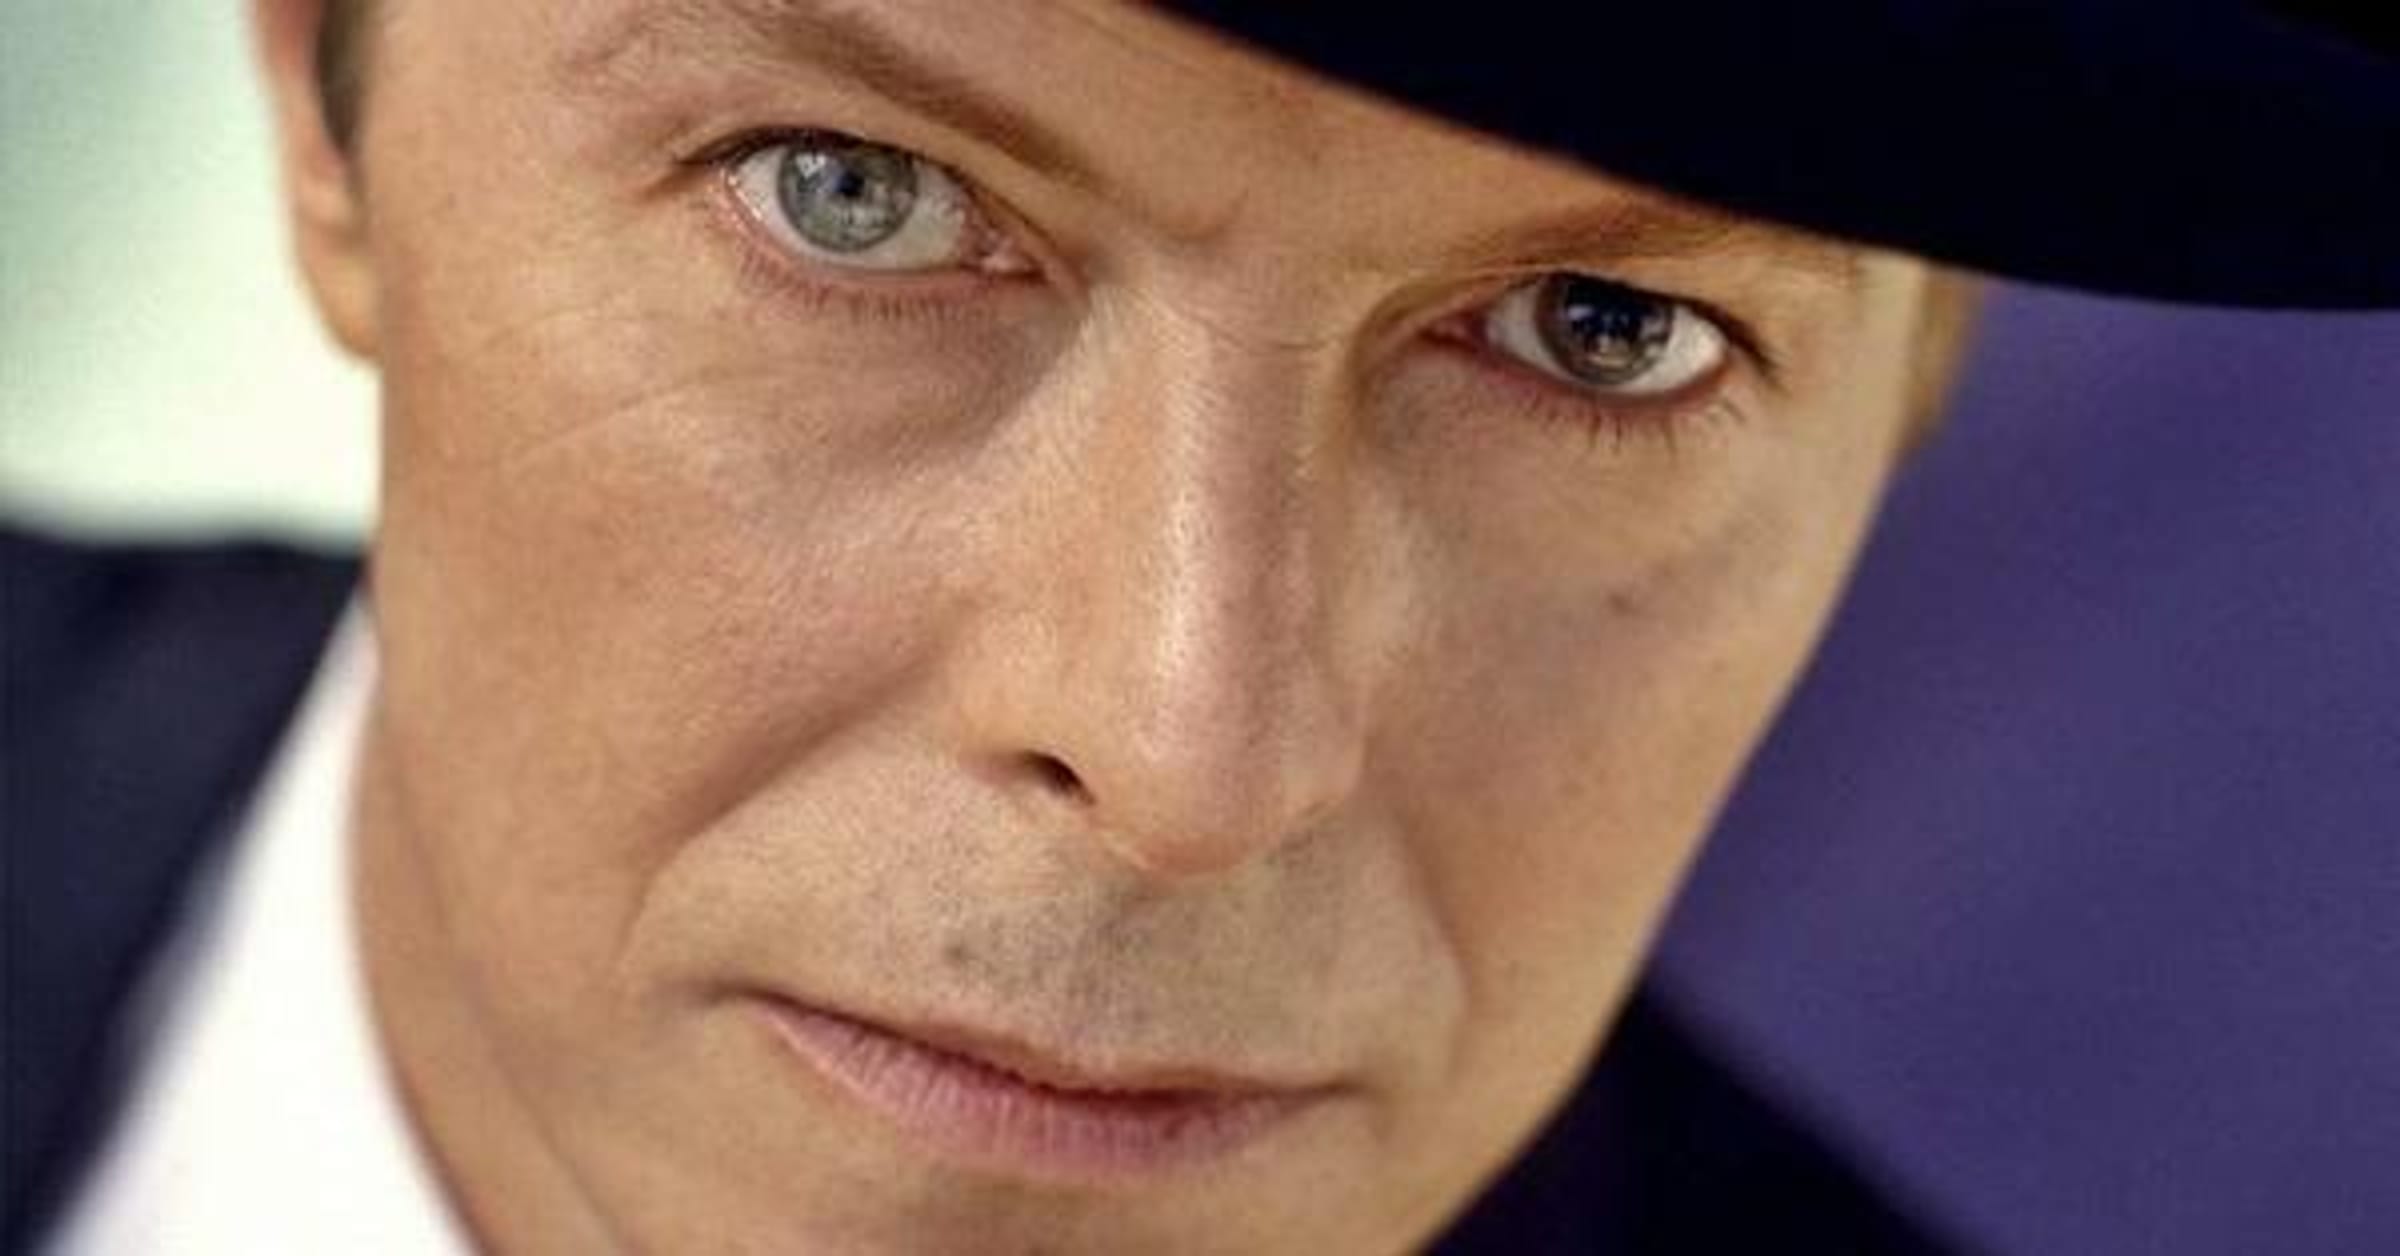 David Bowie discography - Wikipedia